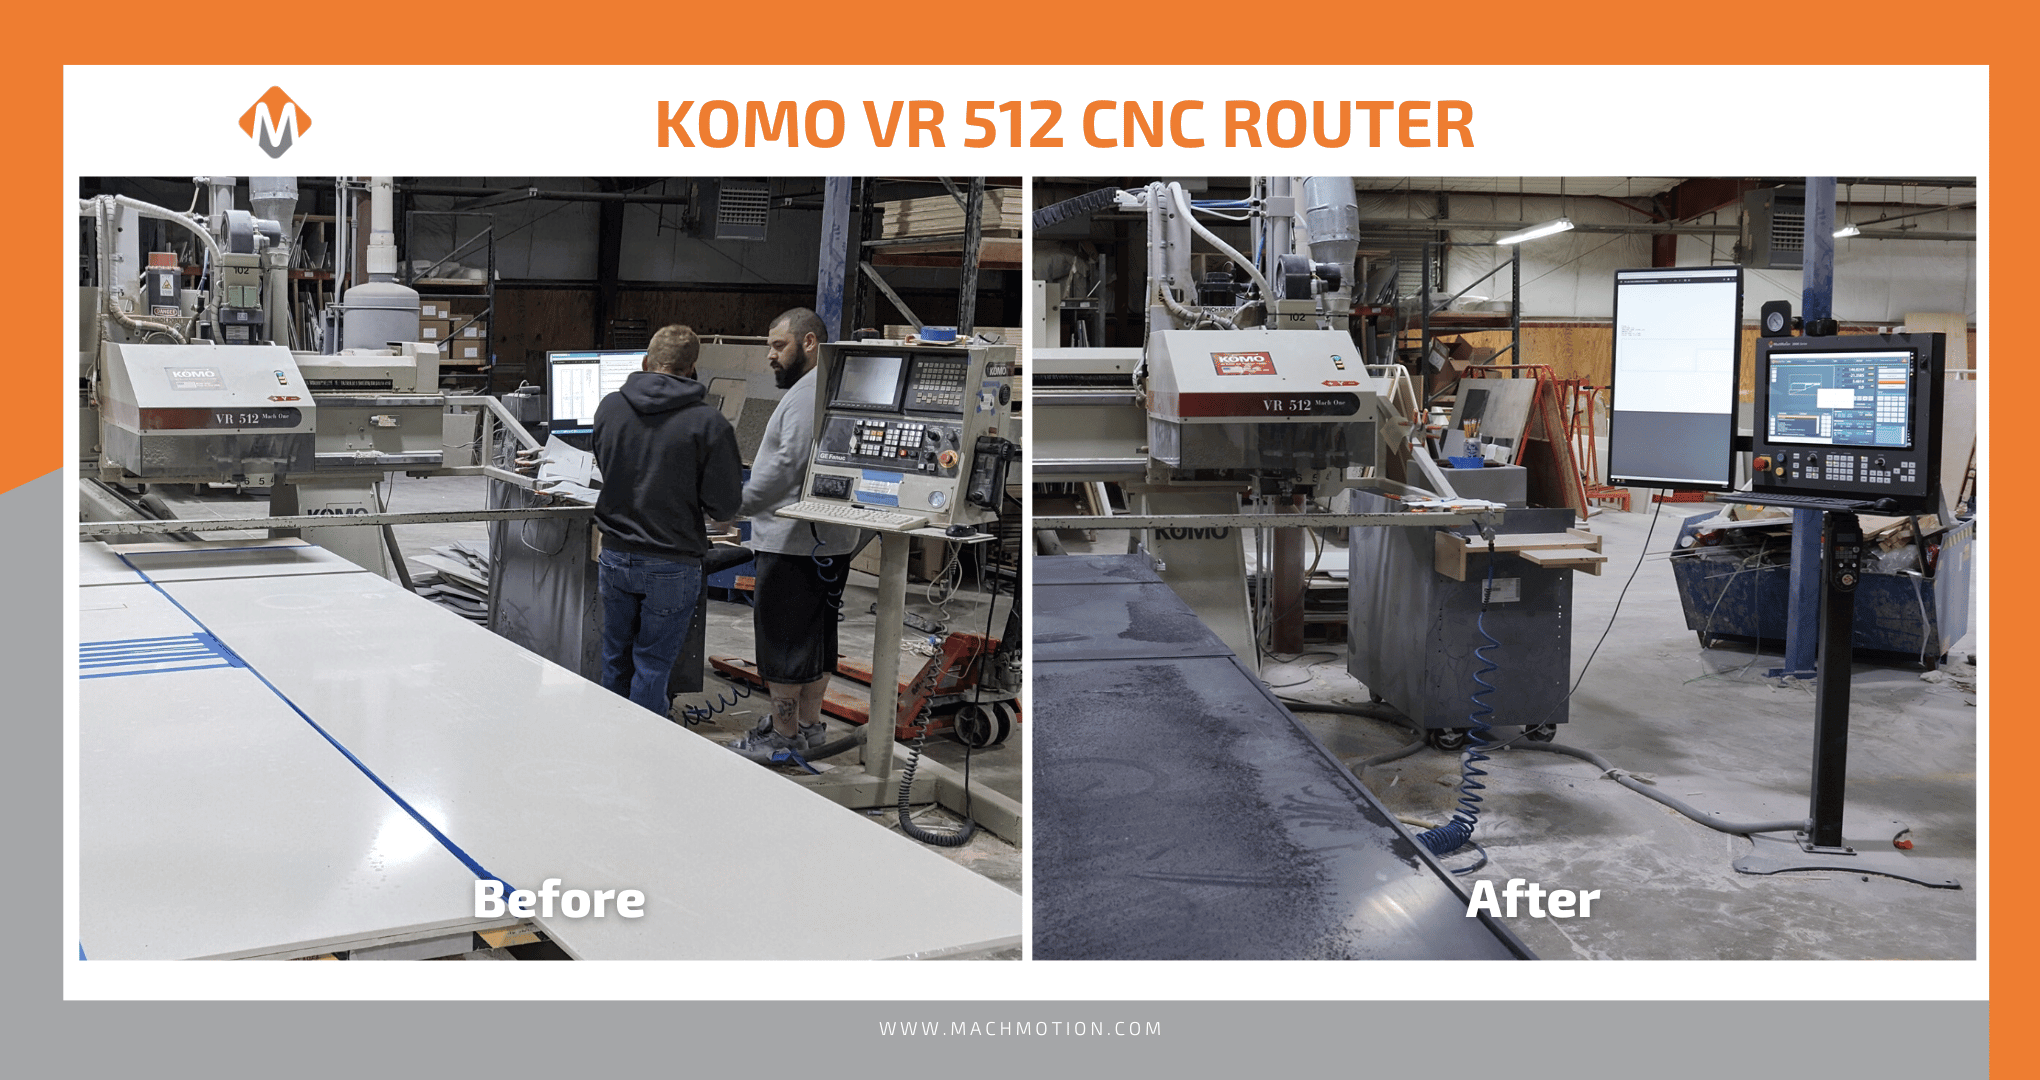 Before and After Down East KOMO VR 512 CNC Router